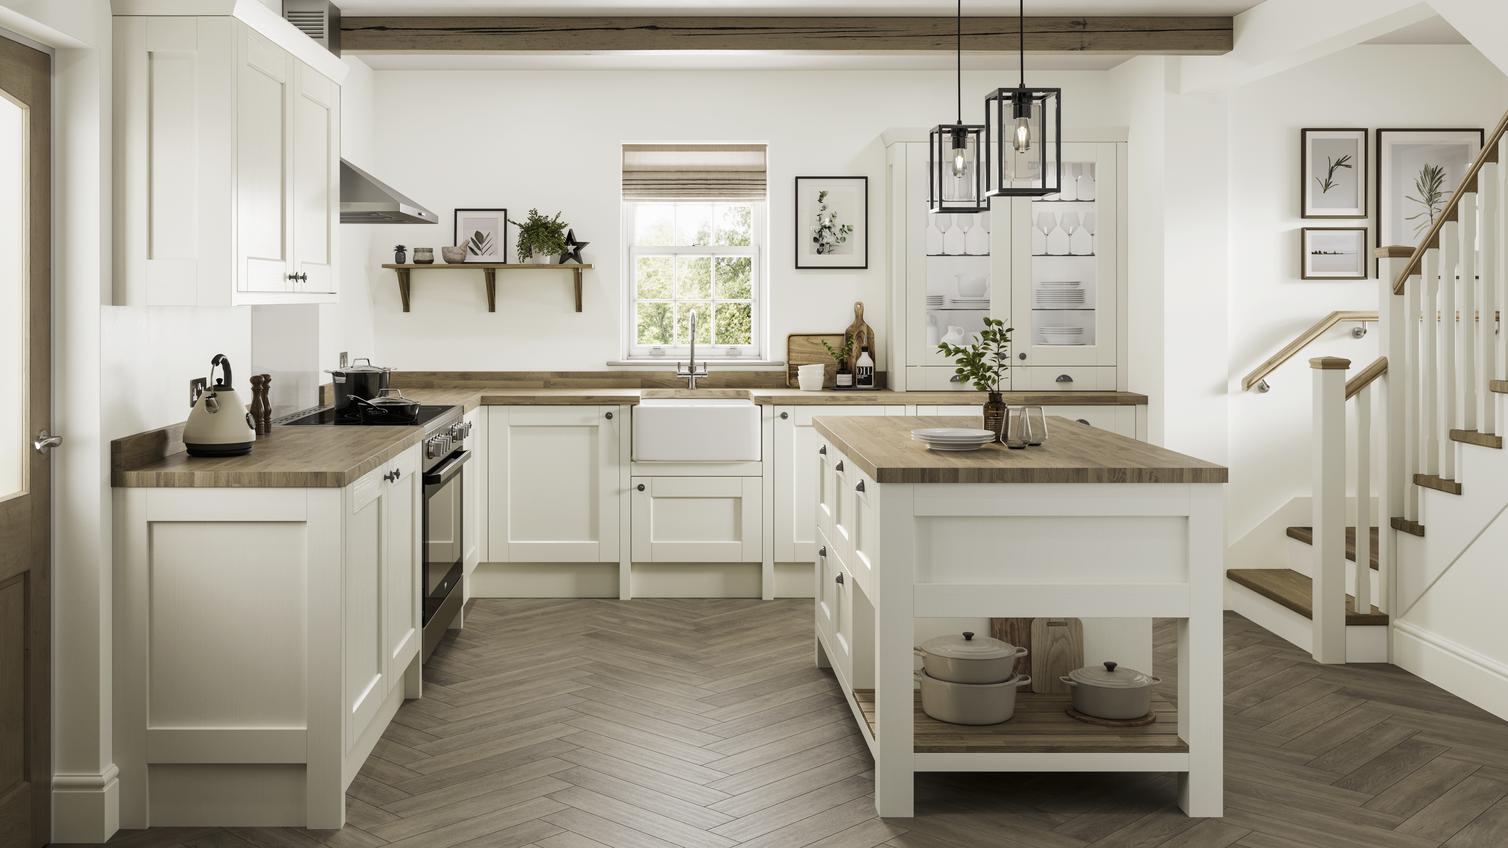 A large farmhouse kitchen in an island layout. Includes white shaker doors, solid oak worktops, and a white ceramic sink